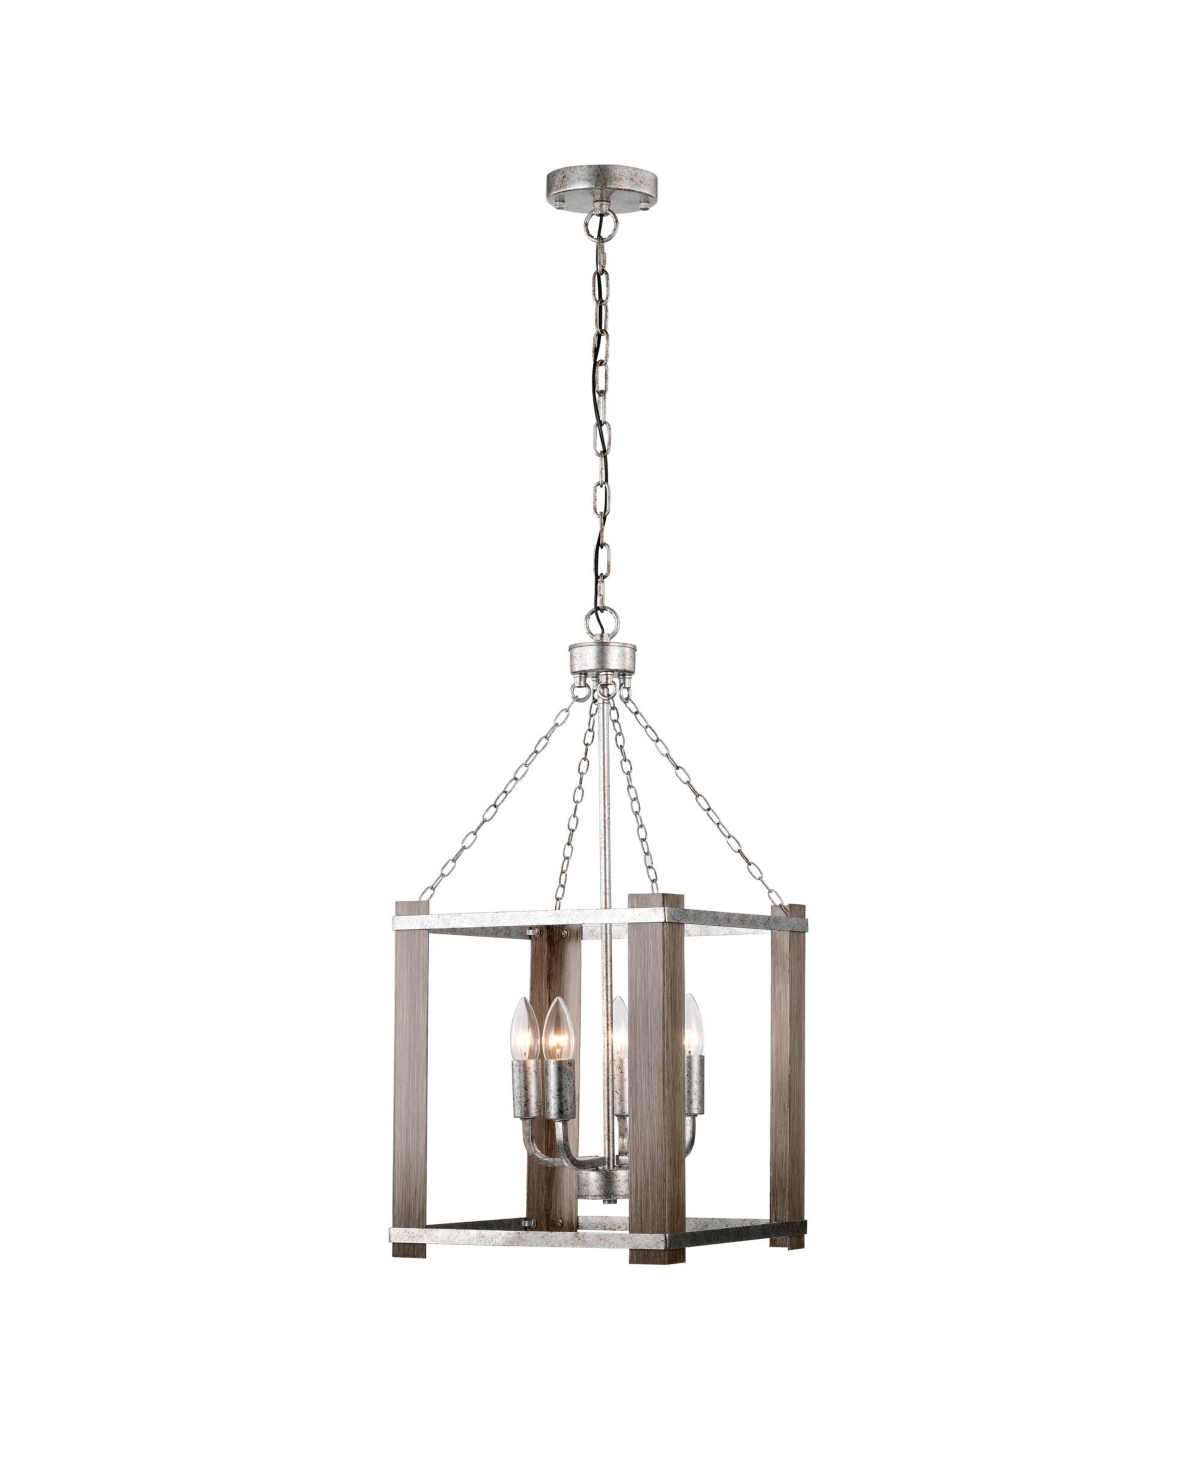 Home Accessories Jenus 13" 4-light Indoor Finish Chandelier With Light Kit In Rustic Silver And Faux Wood Grain